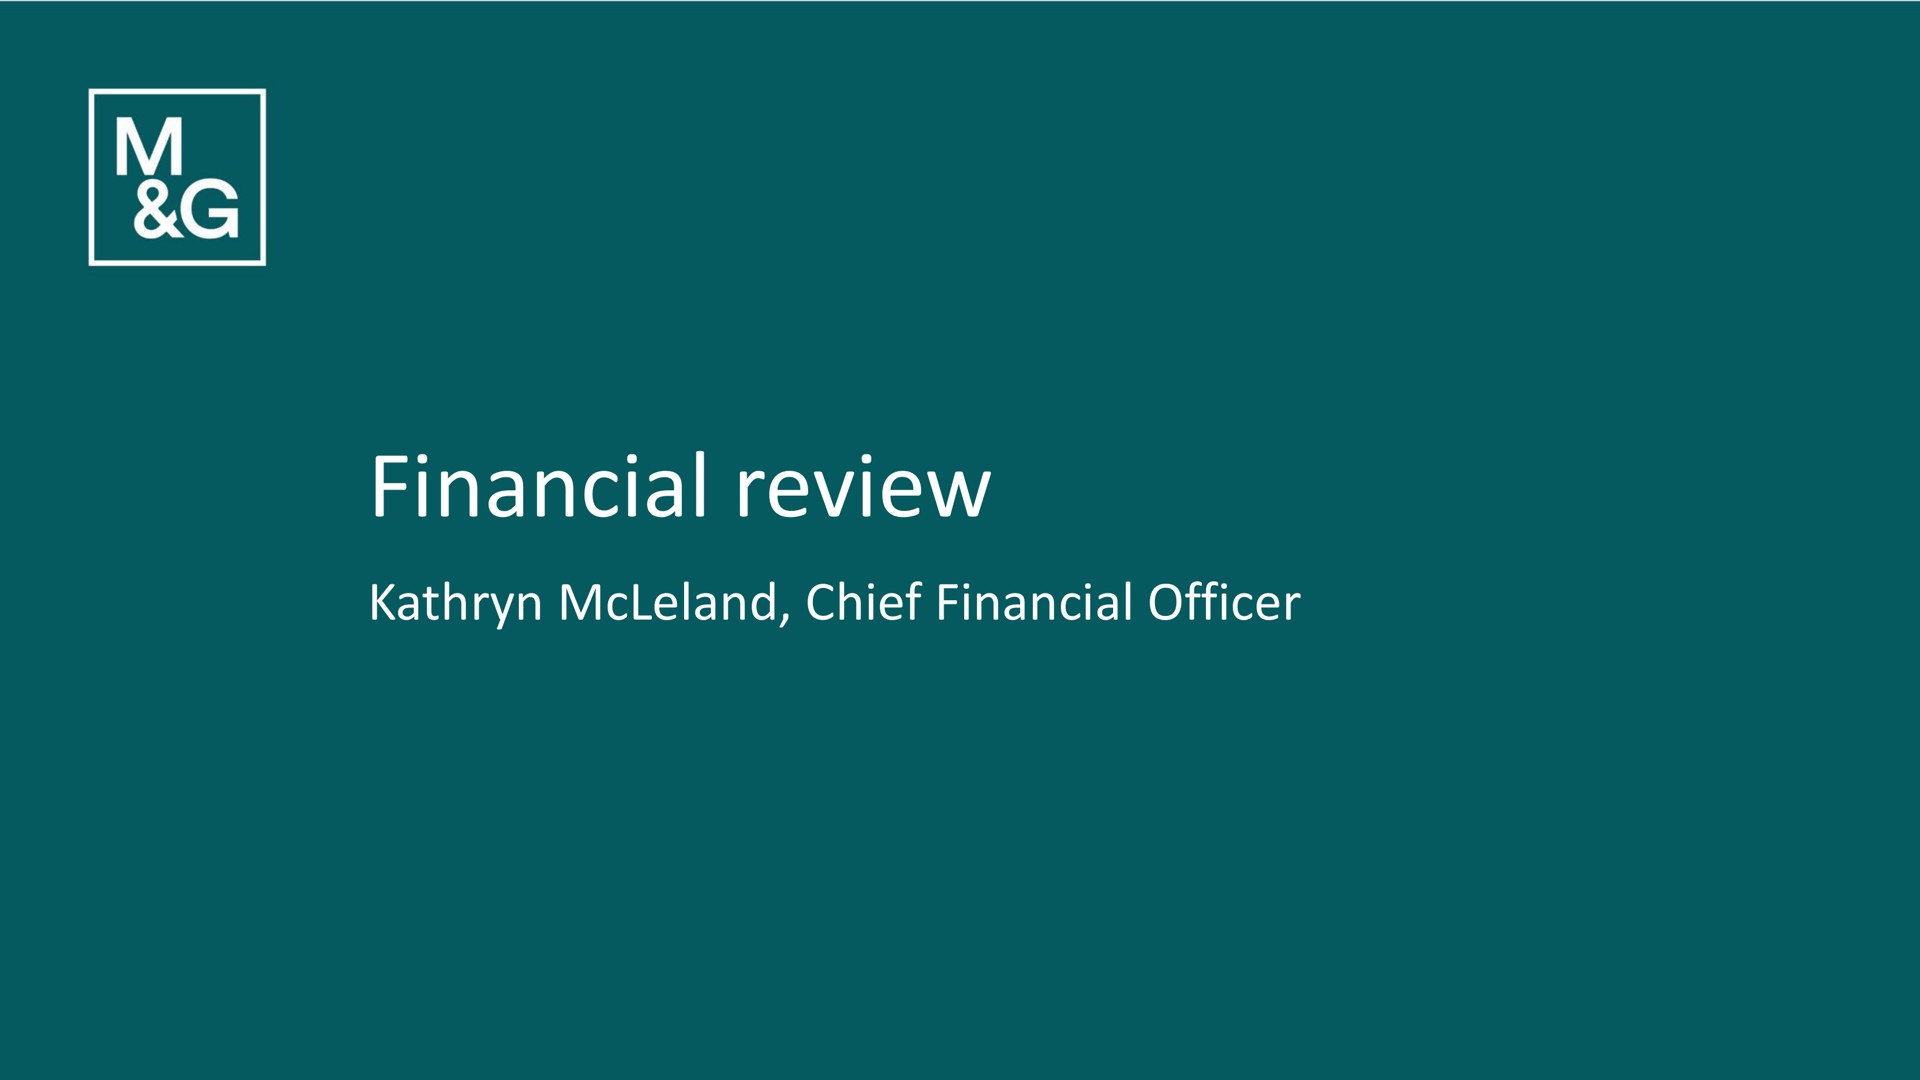 financial review chief financial officer | M&G